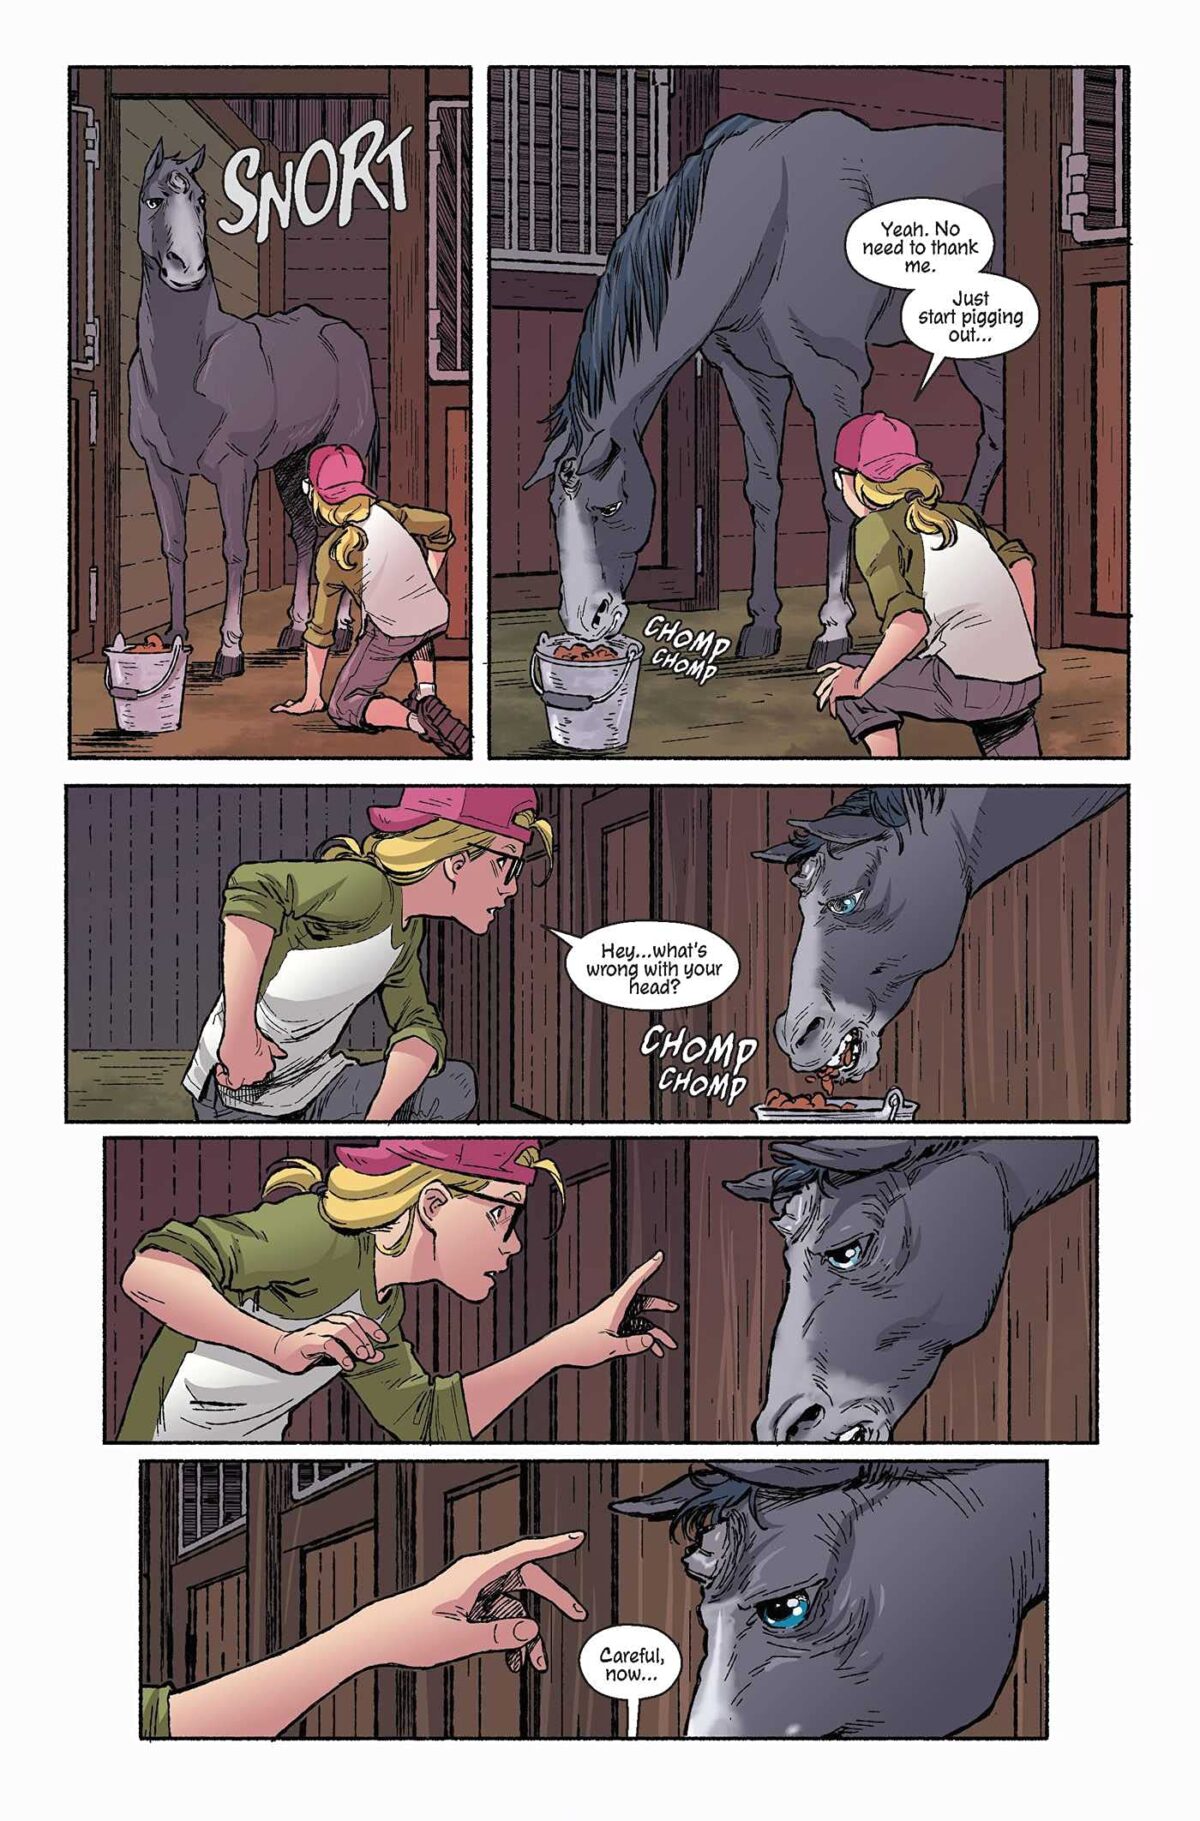 Five more panels from the comic book Unikorn. The young girl considers the possibility that the bump on the horse's head might be the remains of a unicorn horn that was broken off.